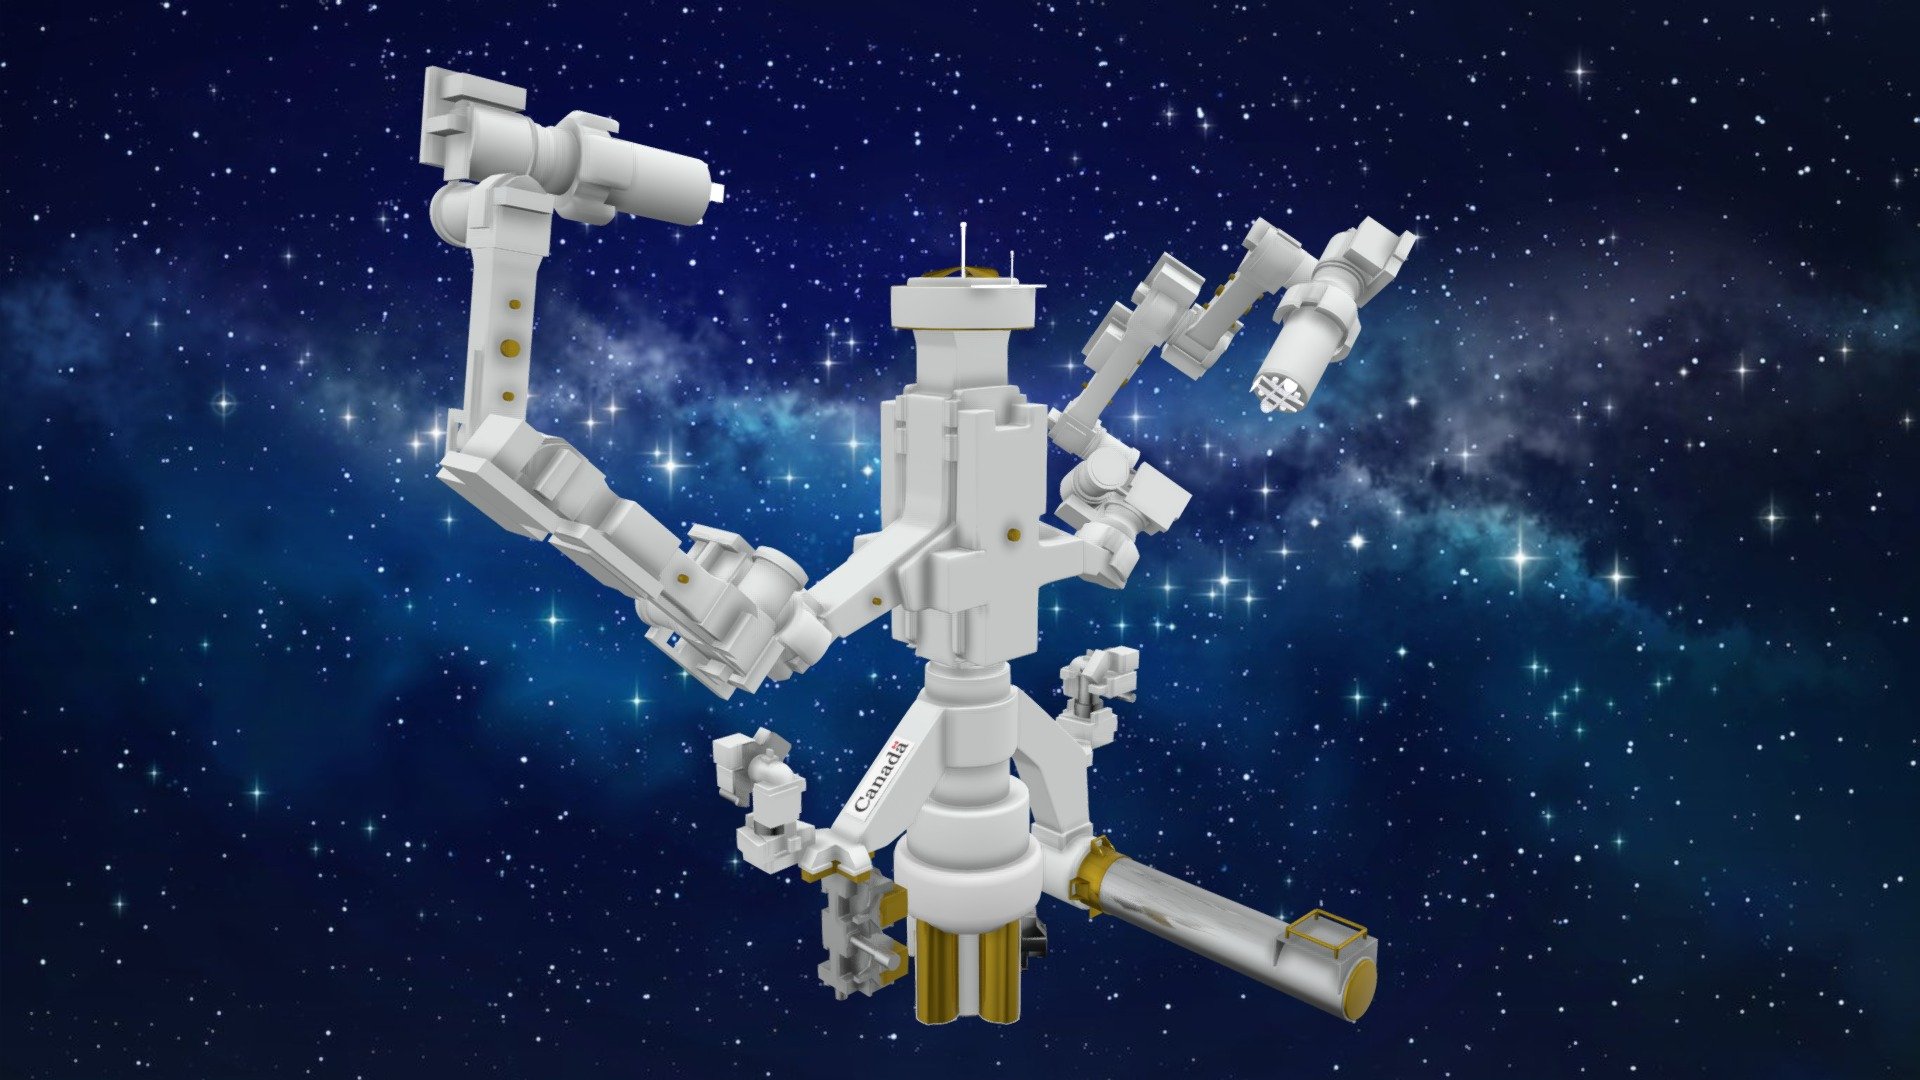 The Canadian Space Agency's Special Purpose Dexterous Manipulator (Dextre), is an exceptional robotic system known for its remarkable dexterity and versatility in the demanding environment of space. Launched in 2008, Dextre serves as an essential component of the International Space Station (ISS) and is part of the Canadian contribution to this multinational space laboratory.

Dextre is often referred to as the &ldquo;robotic handyman